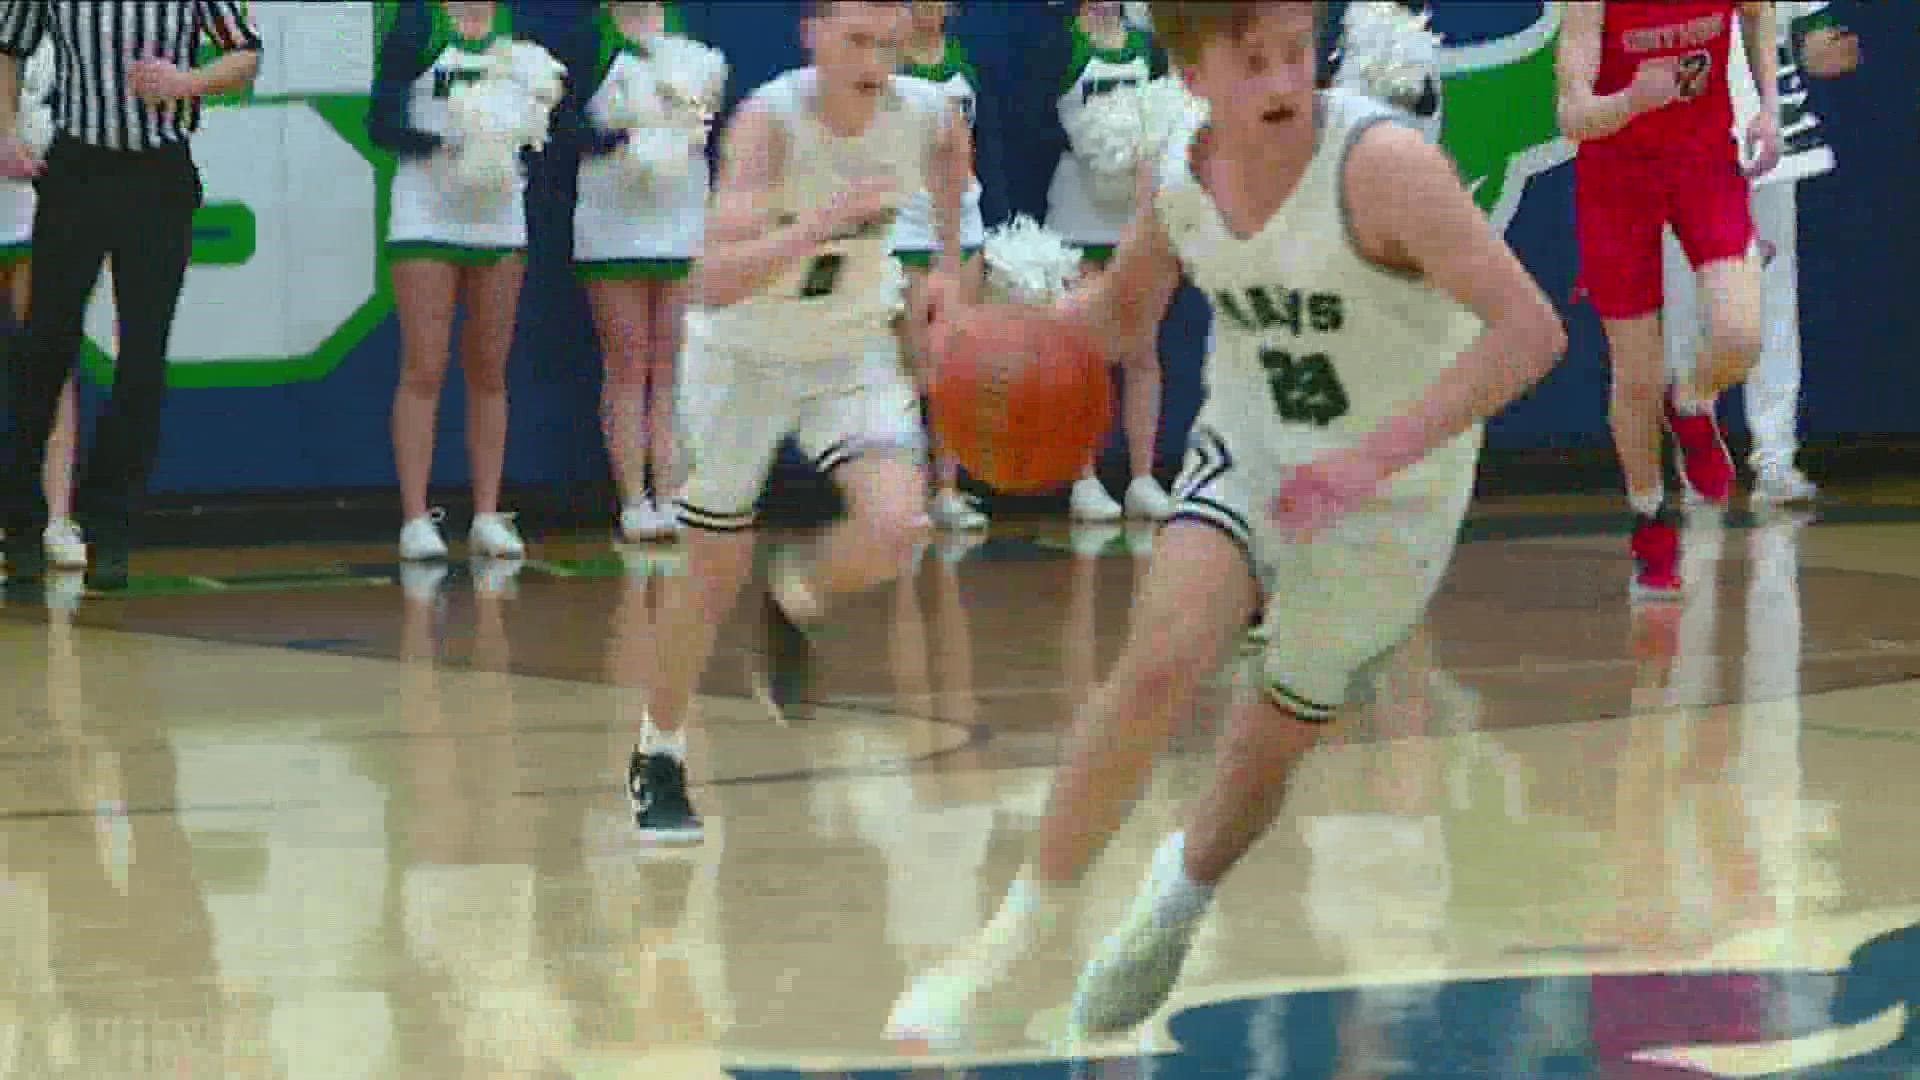 Jan. 5, 2023: Could the Mavericks score an upset against the Storm? Highlights here.